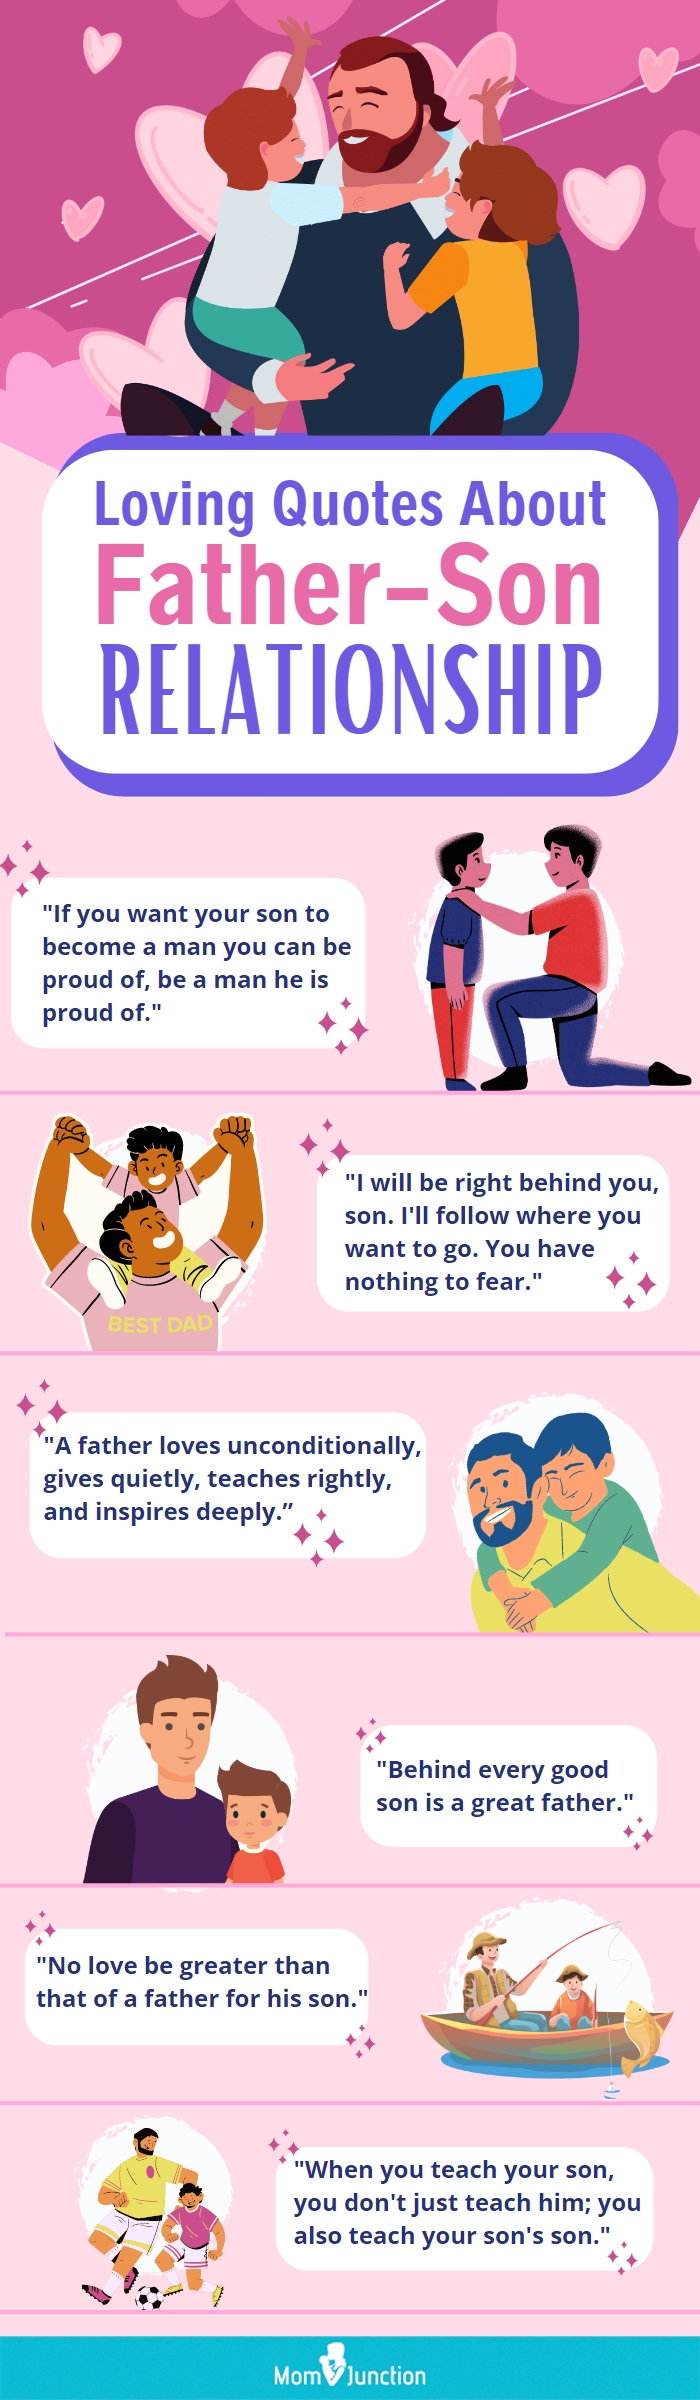 quotes about father son relationship [infographic]